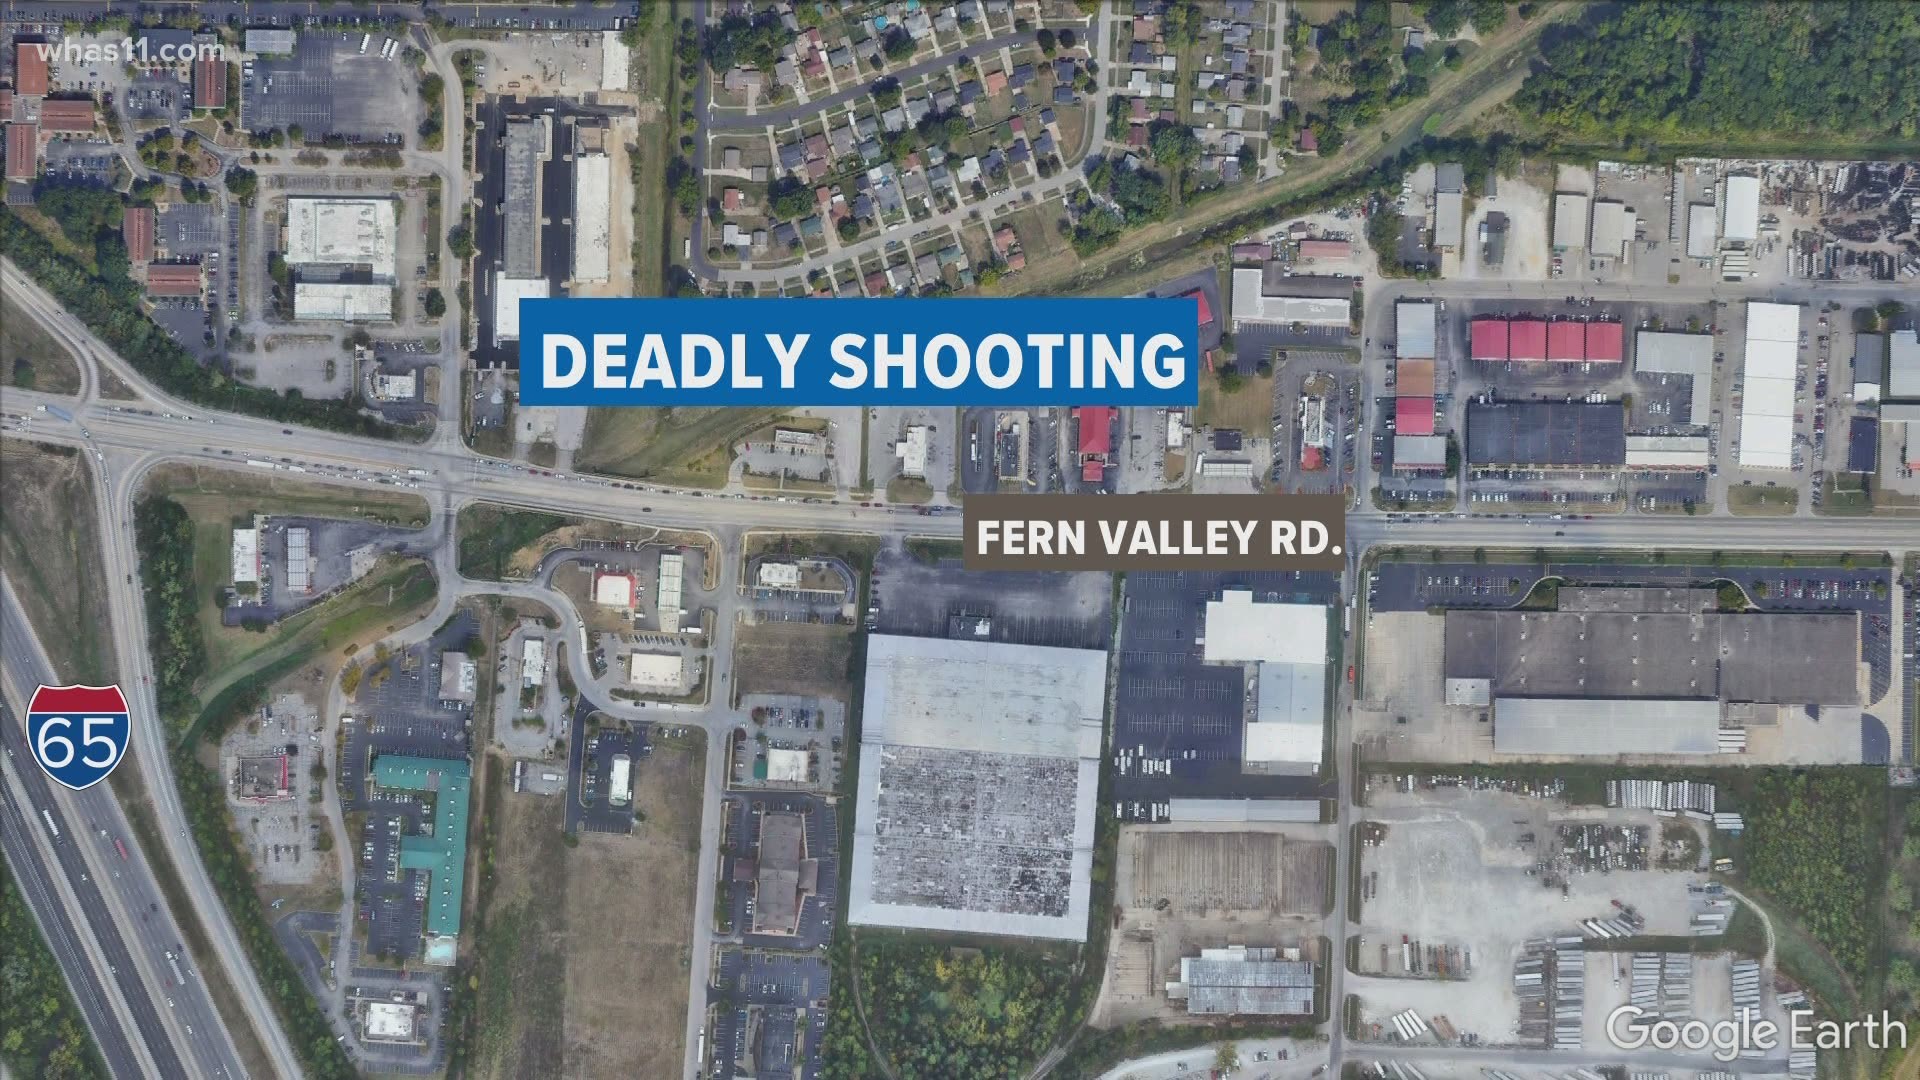 According to LMPD, the shooting happened around 4:30 a.m. in the 2900 block of Fern Valley Road. There are no suspects at this time.